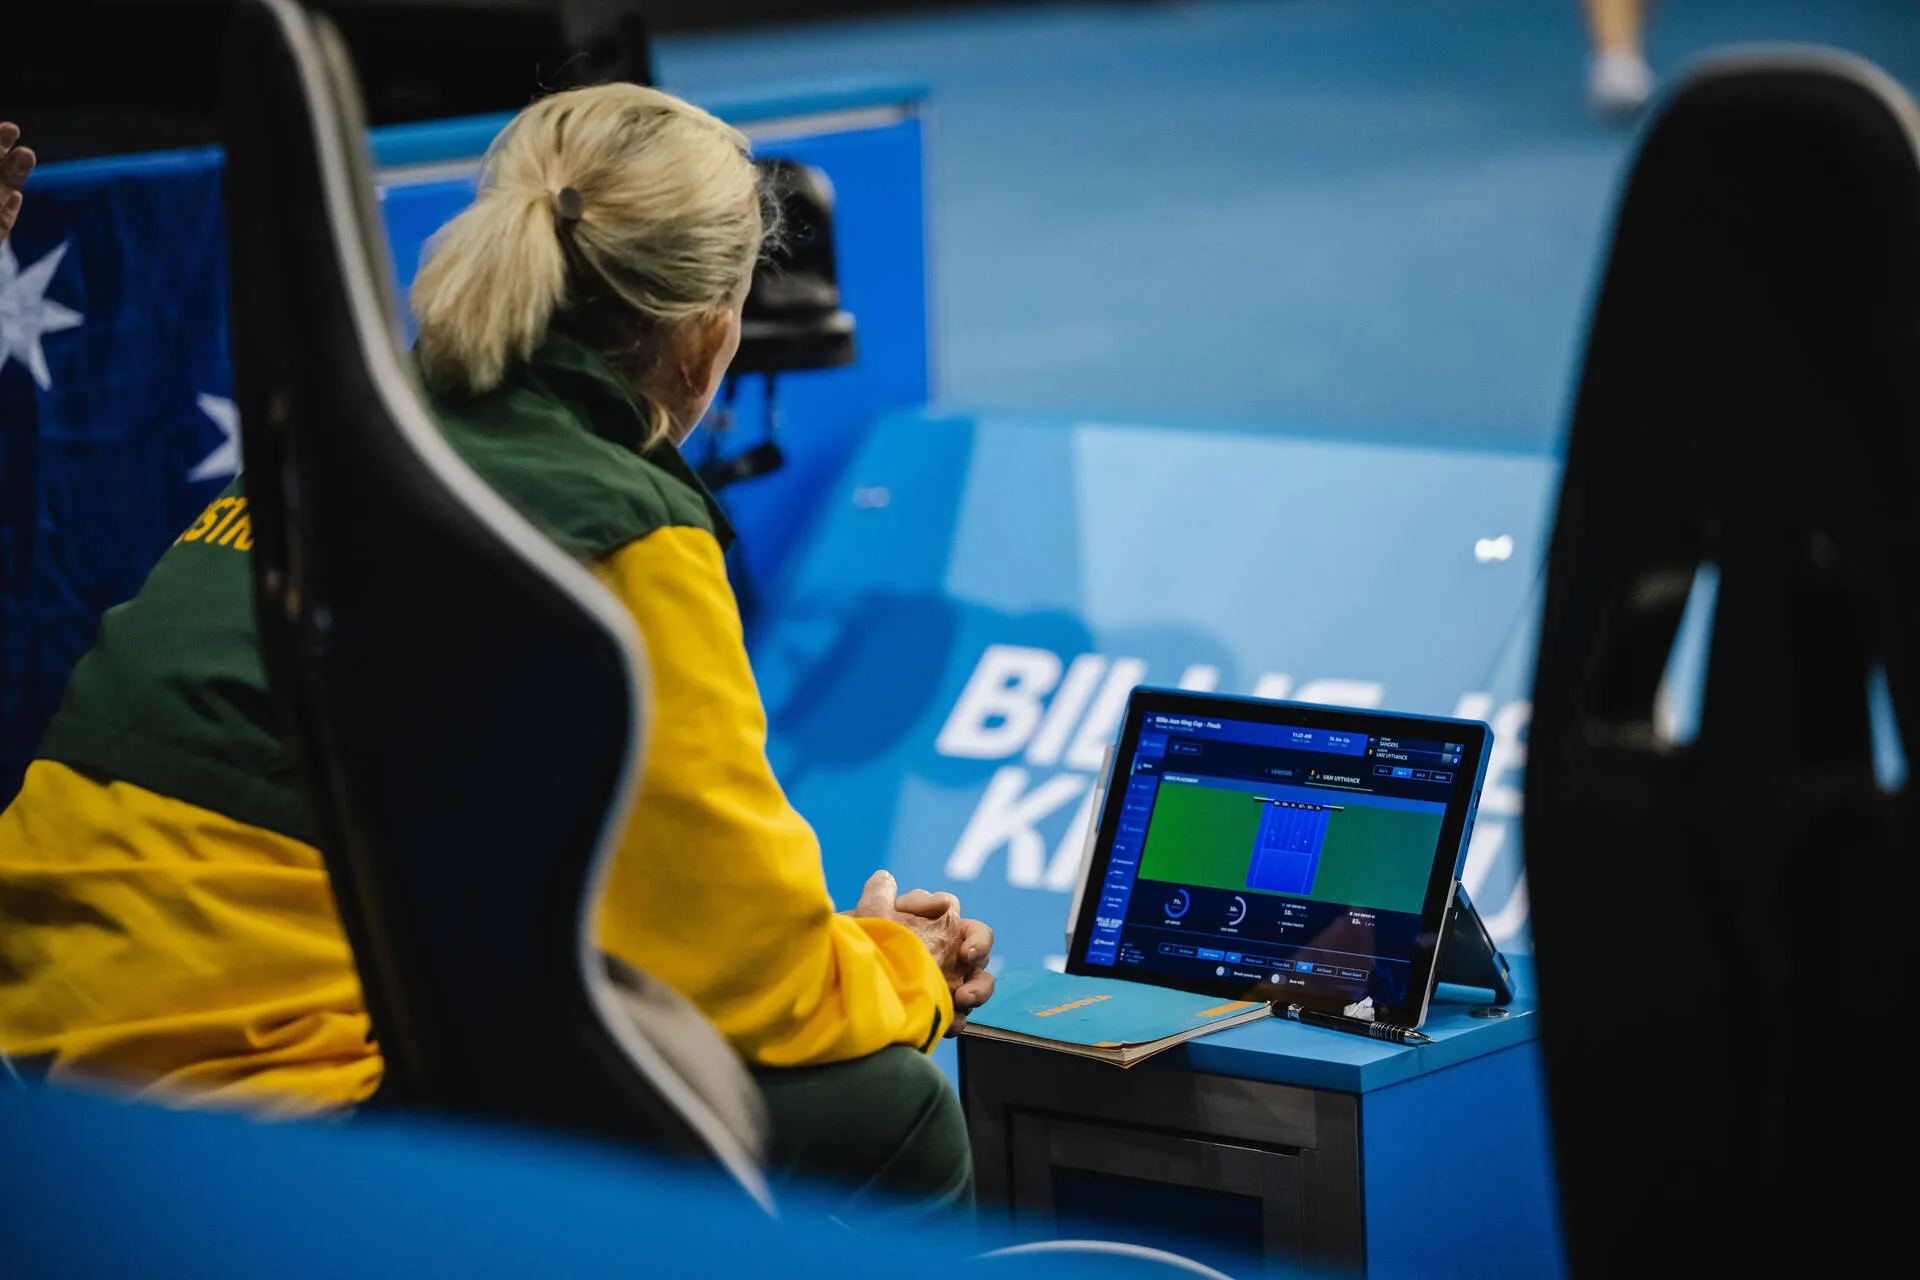 Woman seated looking at Surface device in front tennis court.